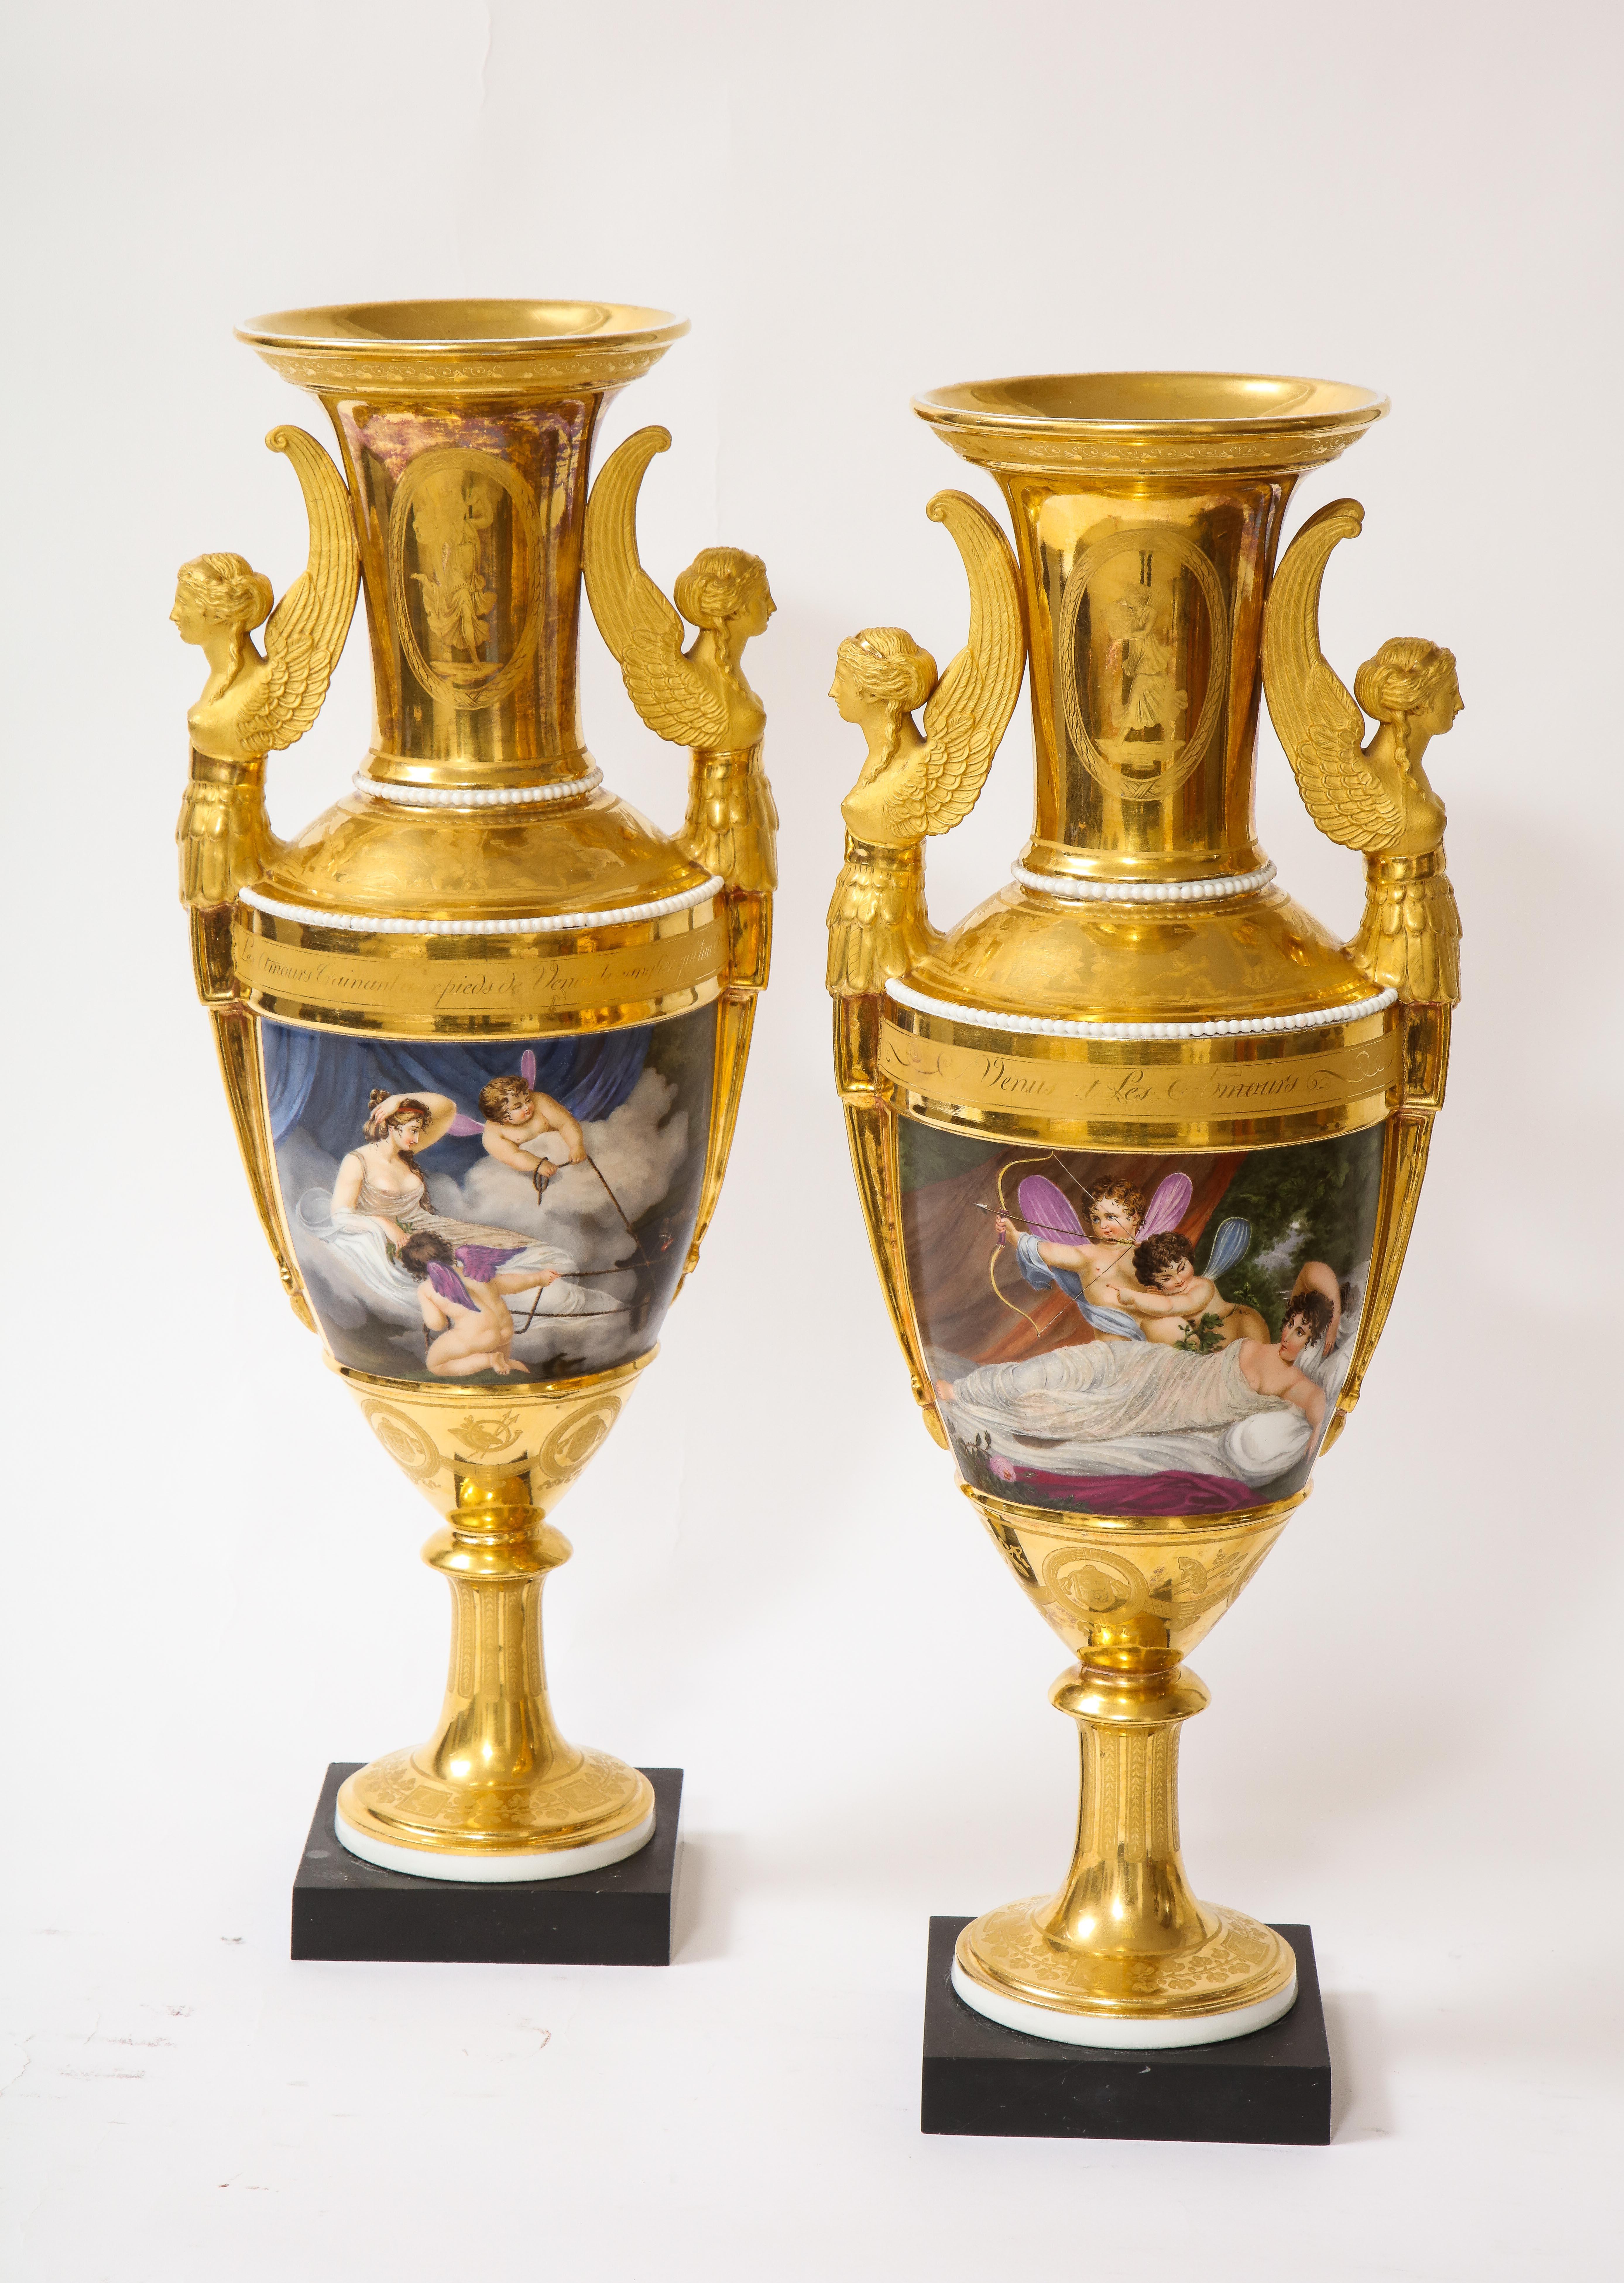 Hand-Painted Pair of First-Empire Period 2-Handled Porcelain Vases with Westall Venus Scenes For Sale